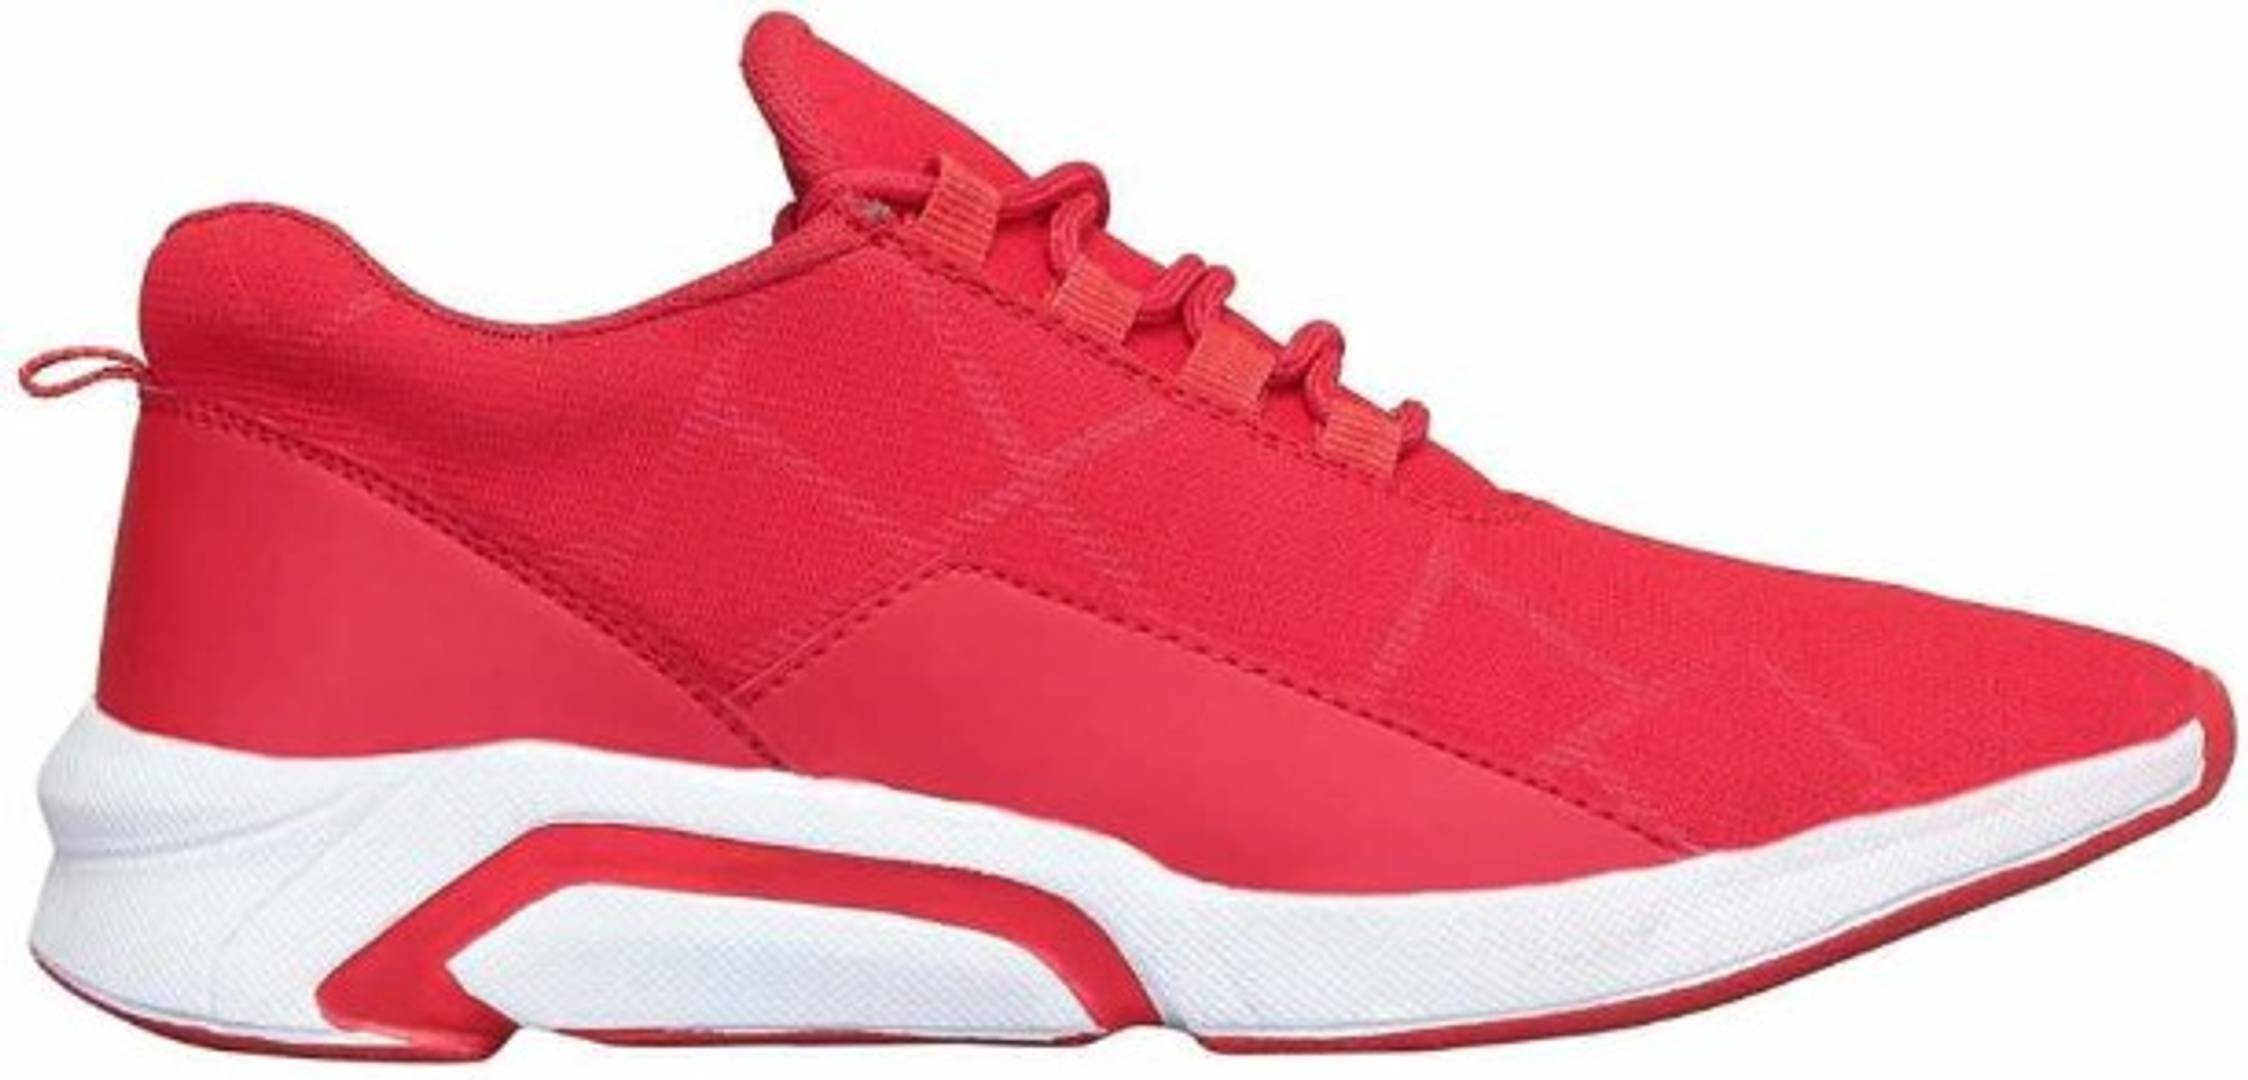 Stylish Red Solid Mesh Sneakers For Men